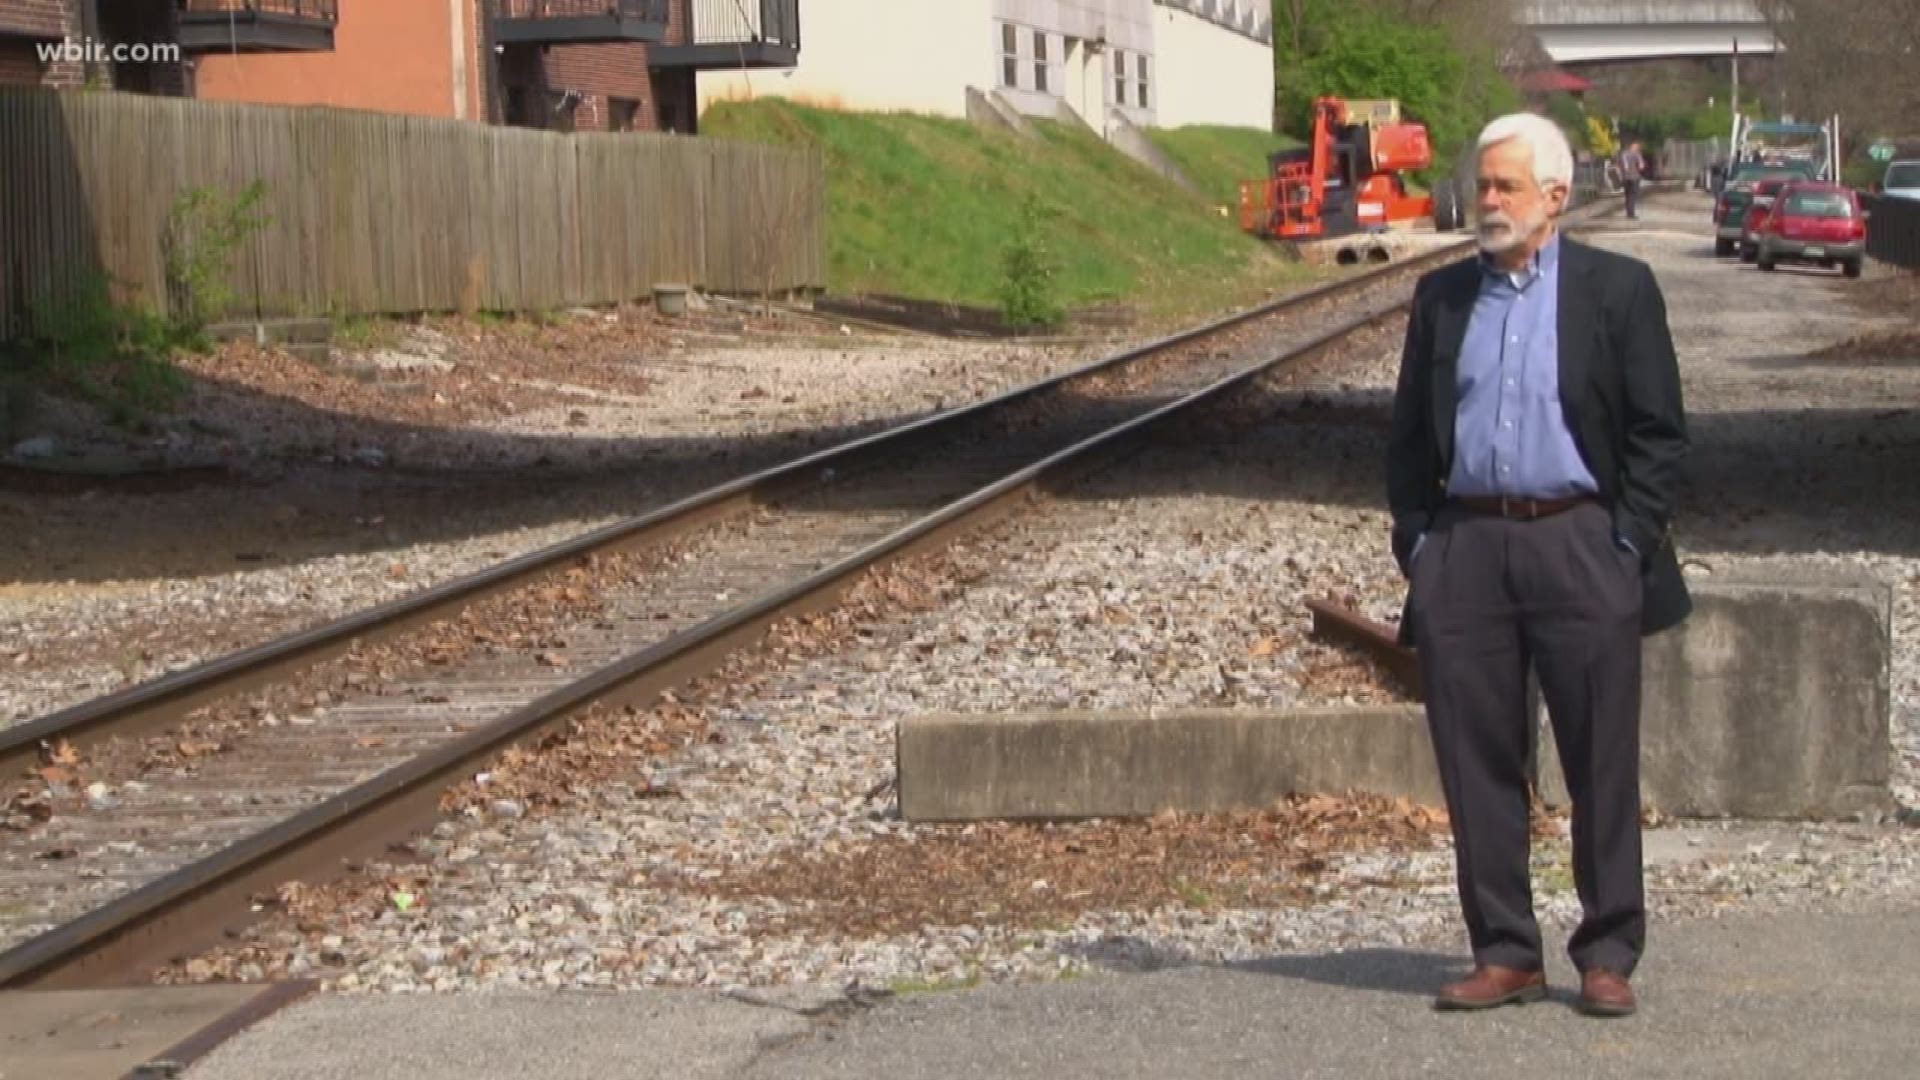 Trains Across America: Knoxville as the heart of a new Silicon Valley